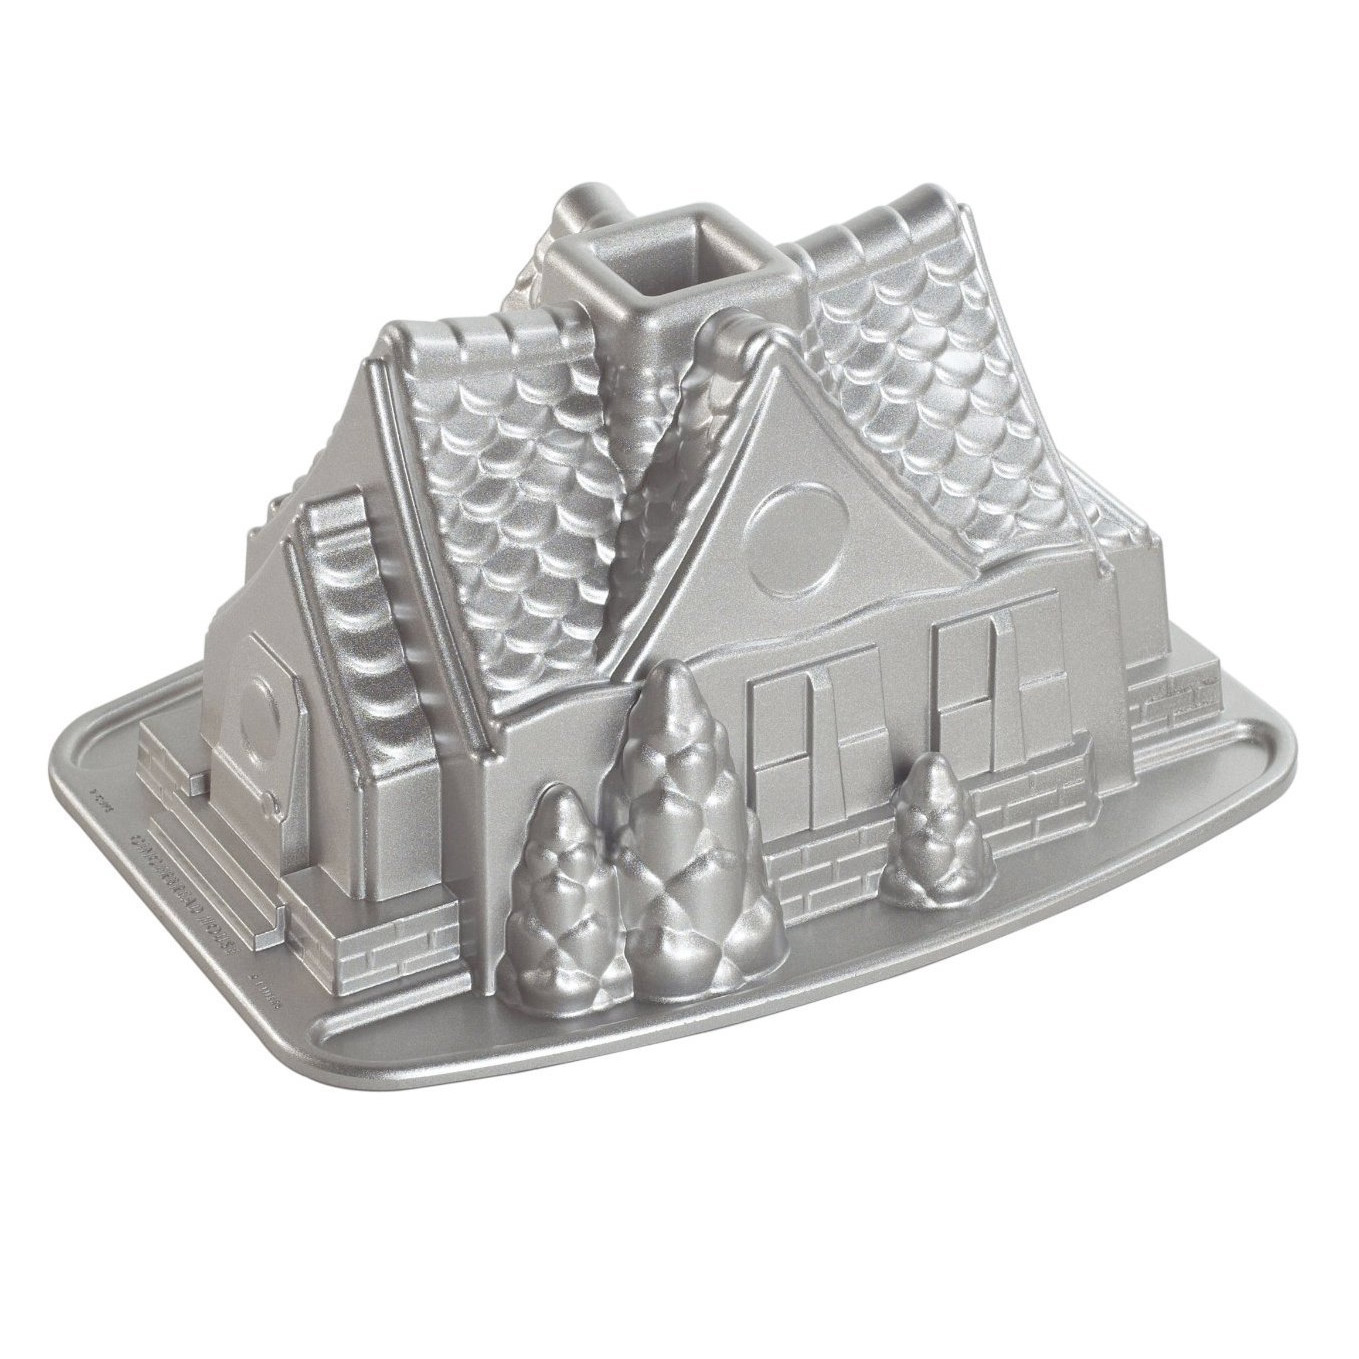 Nordic Ware Gingerbread House Mould